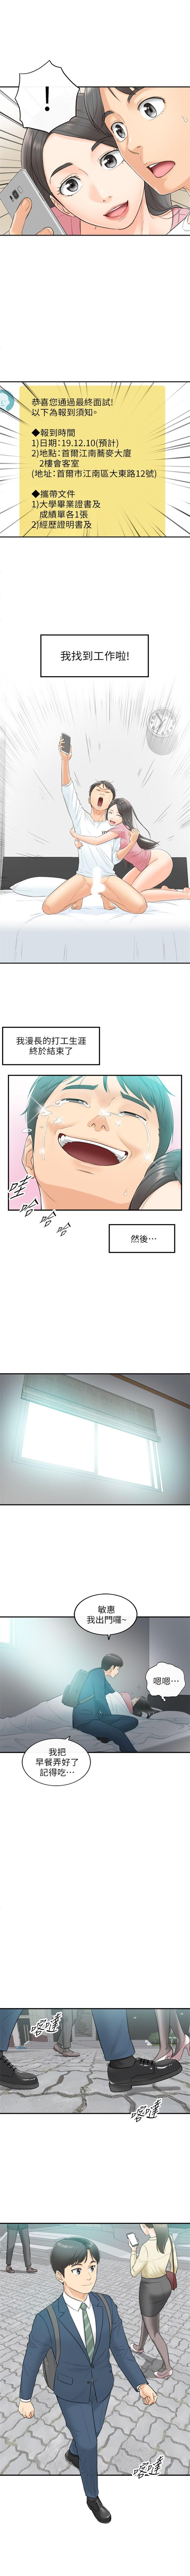 Gayclips 正妹小主管 1-54 官方中文（連載中） Smooth - Page 8